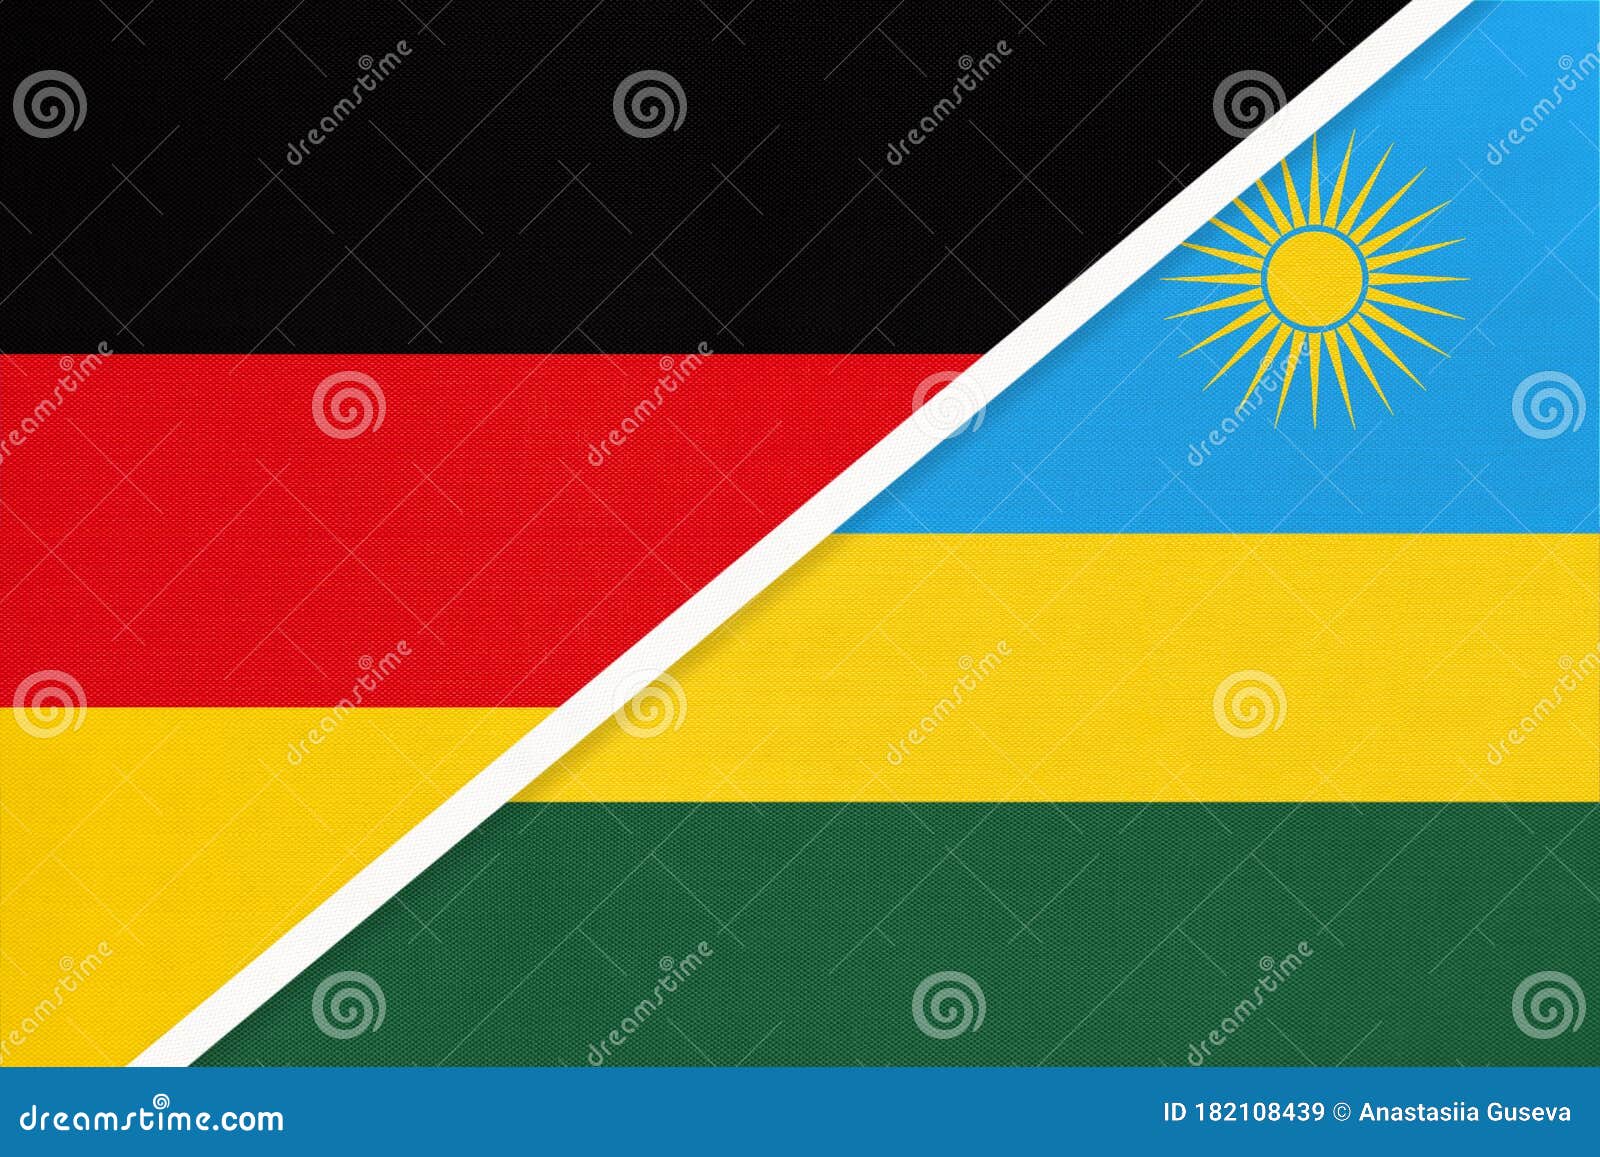 germany vs rwanda,  of two national flags. relationship between european and african countries